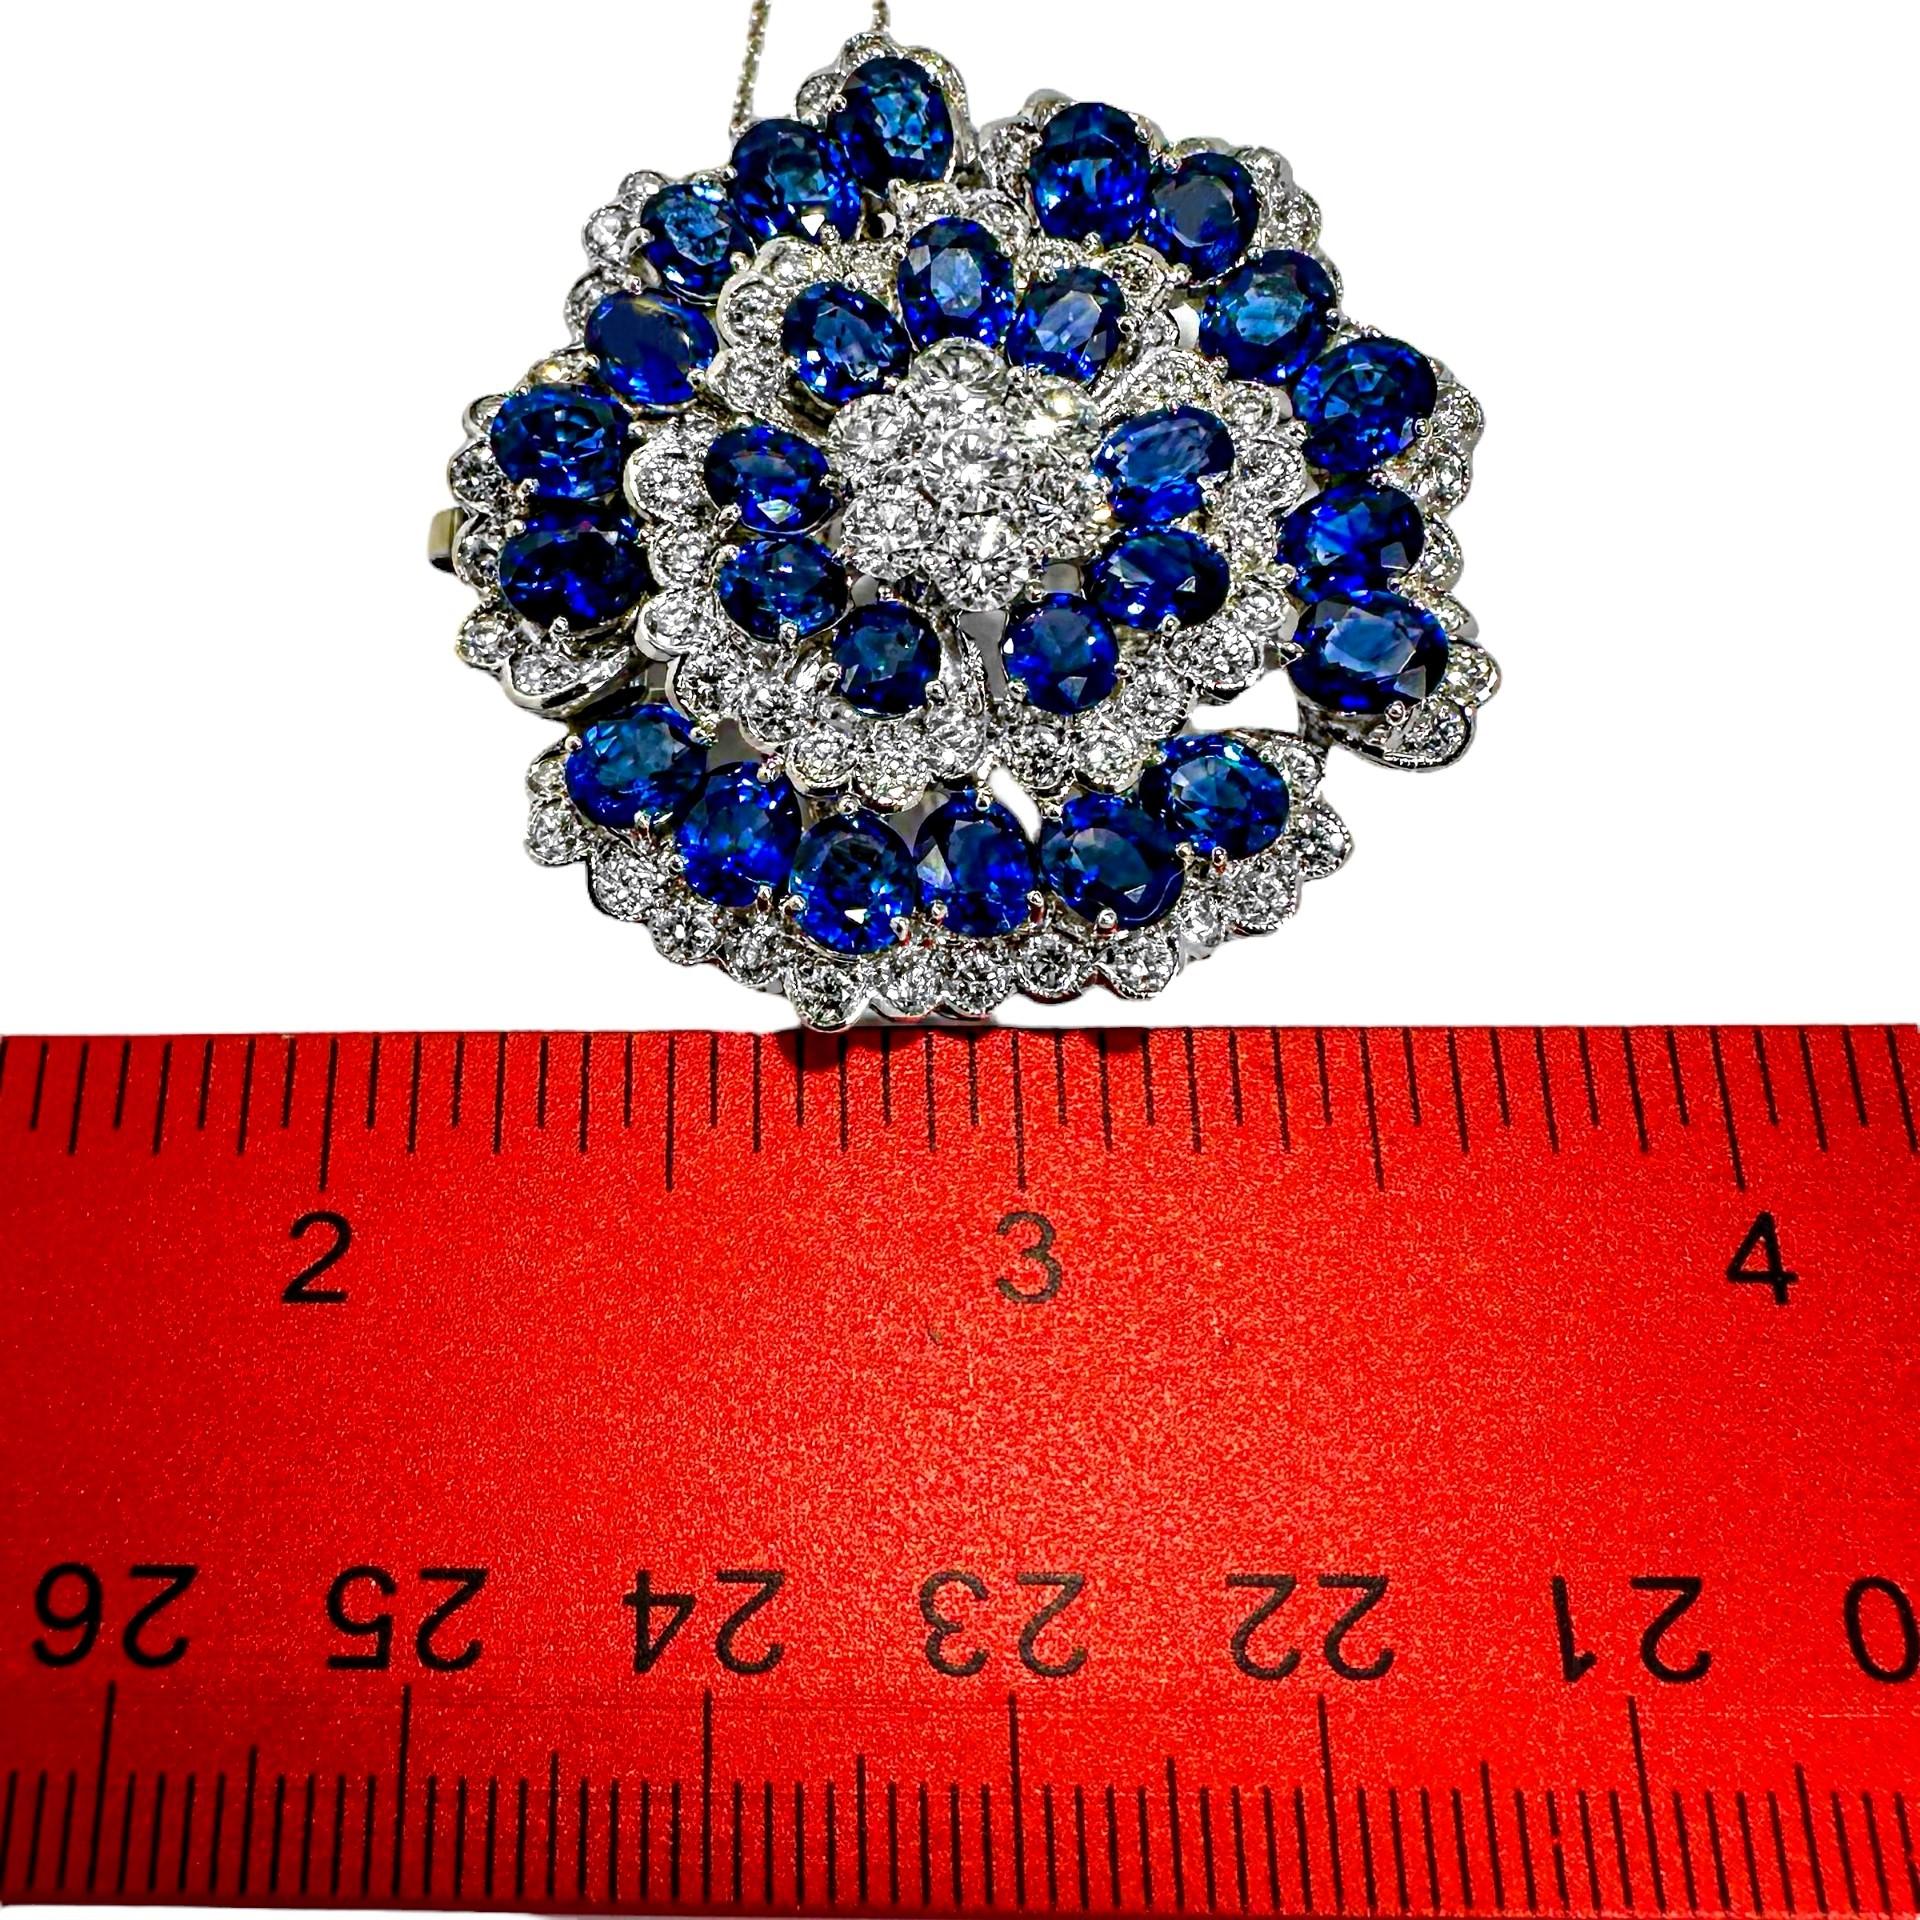 Brilliant Cut Glittering 18k White Gold Camellia Flower set with Diamonds and Blue Sapphires